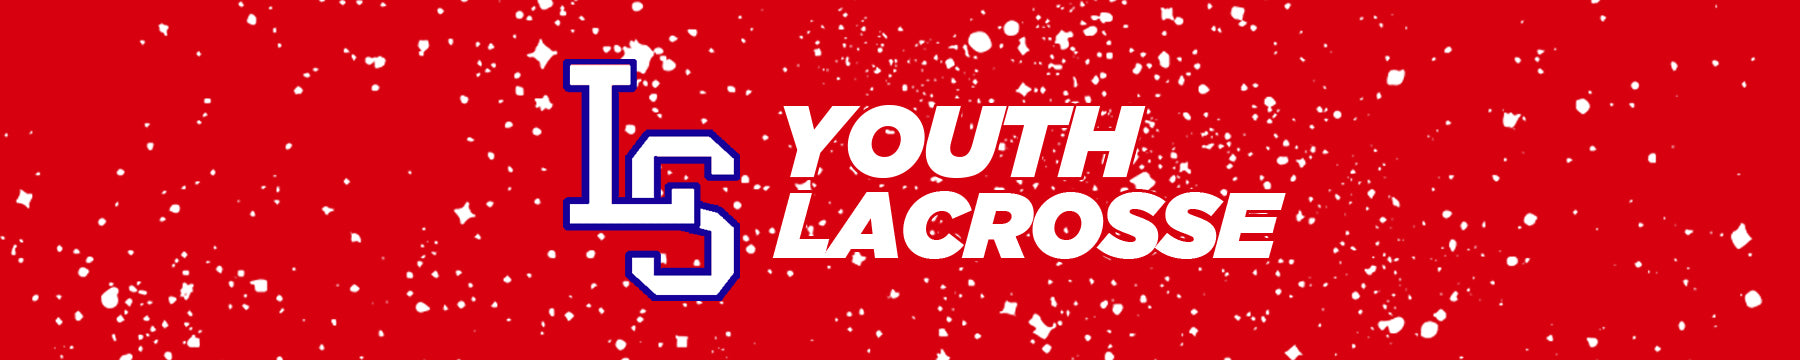 LS Youth Lacrosse